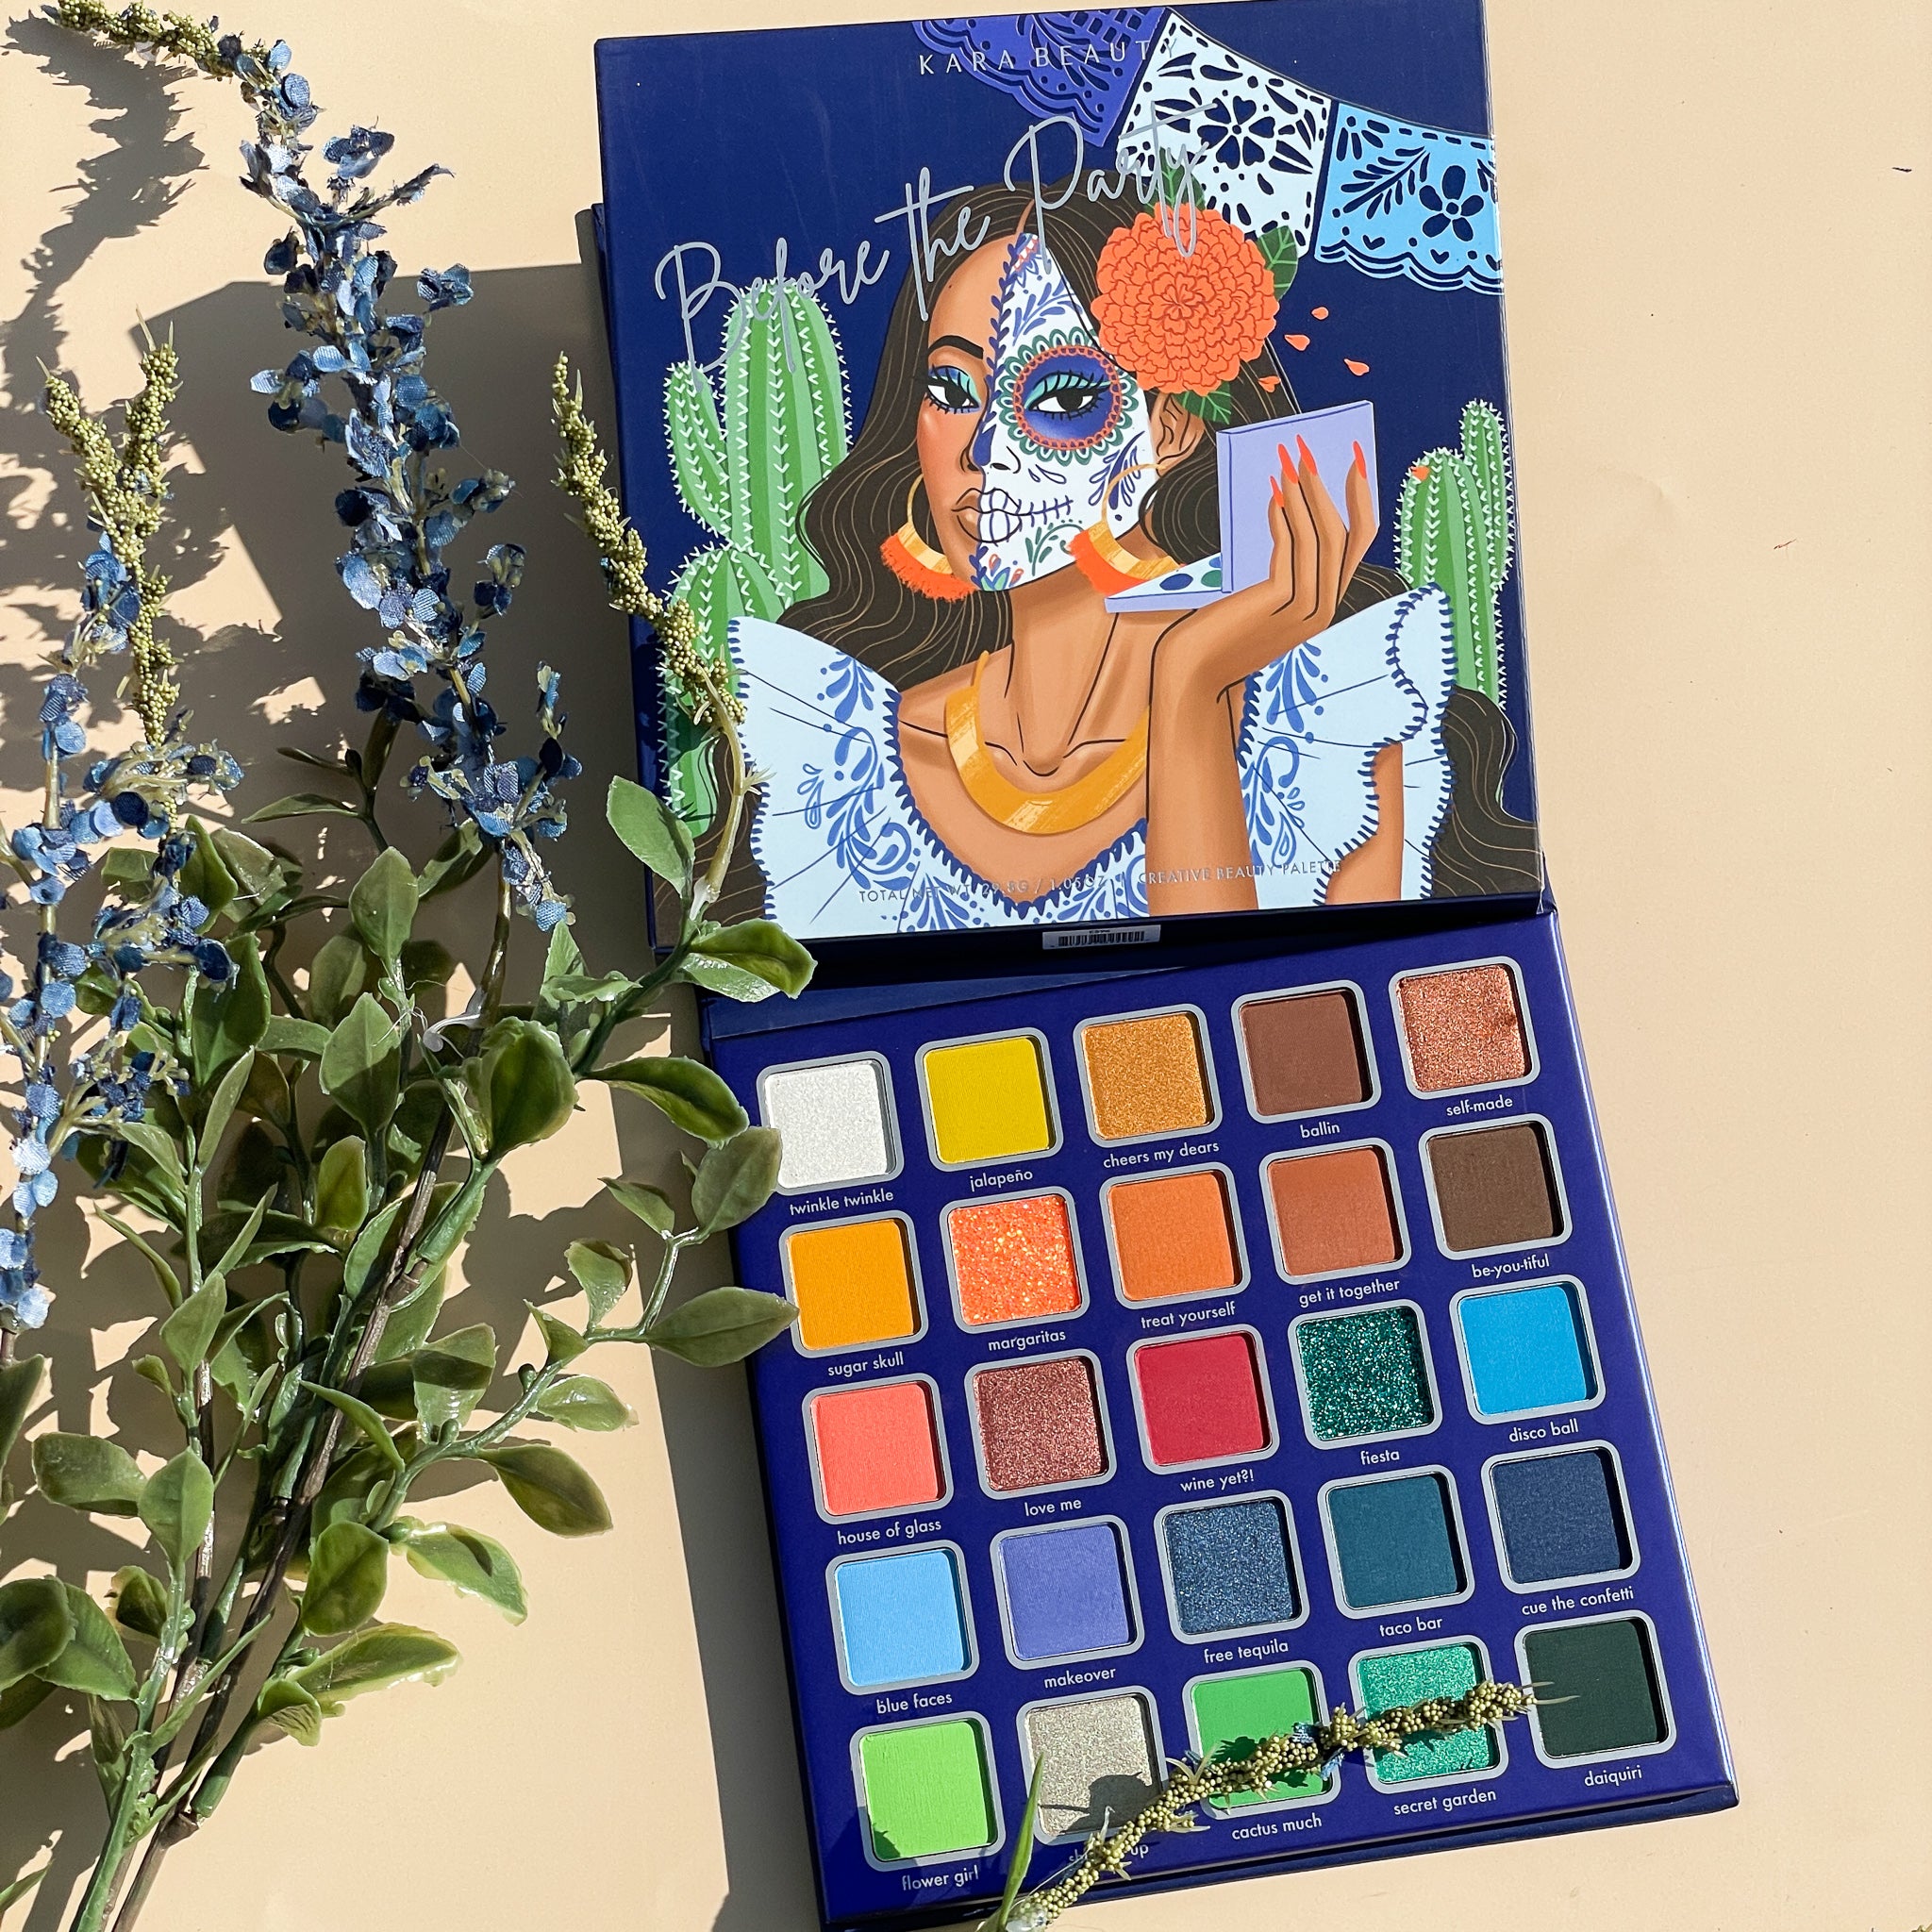 Kara Beauty's Before the Party Day of the Dead inspired 30-Shade Vegan eyeshadow palette